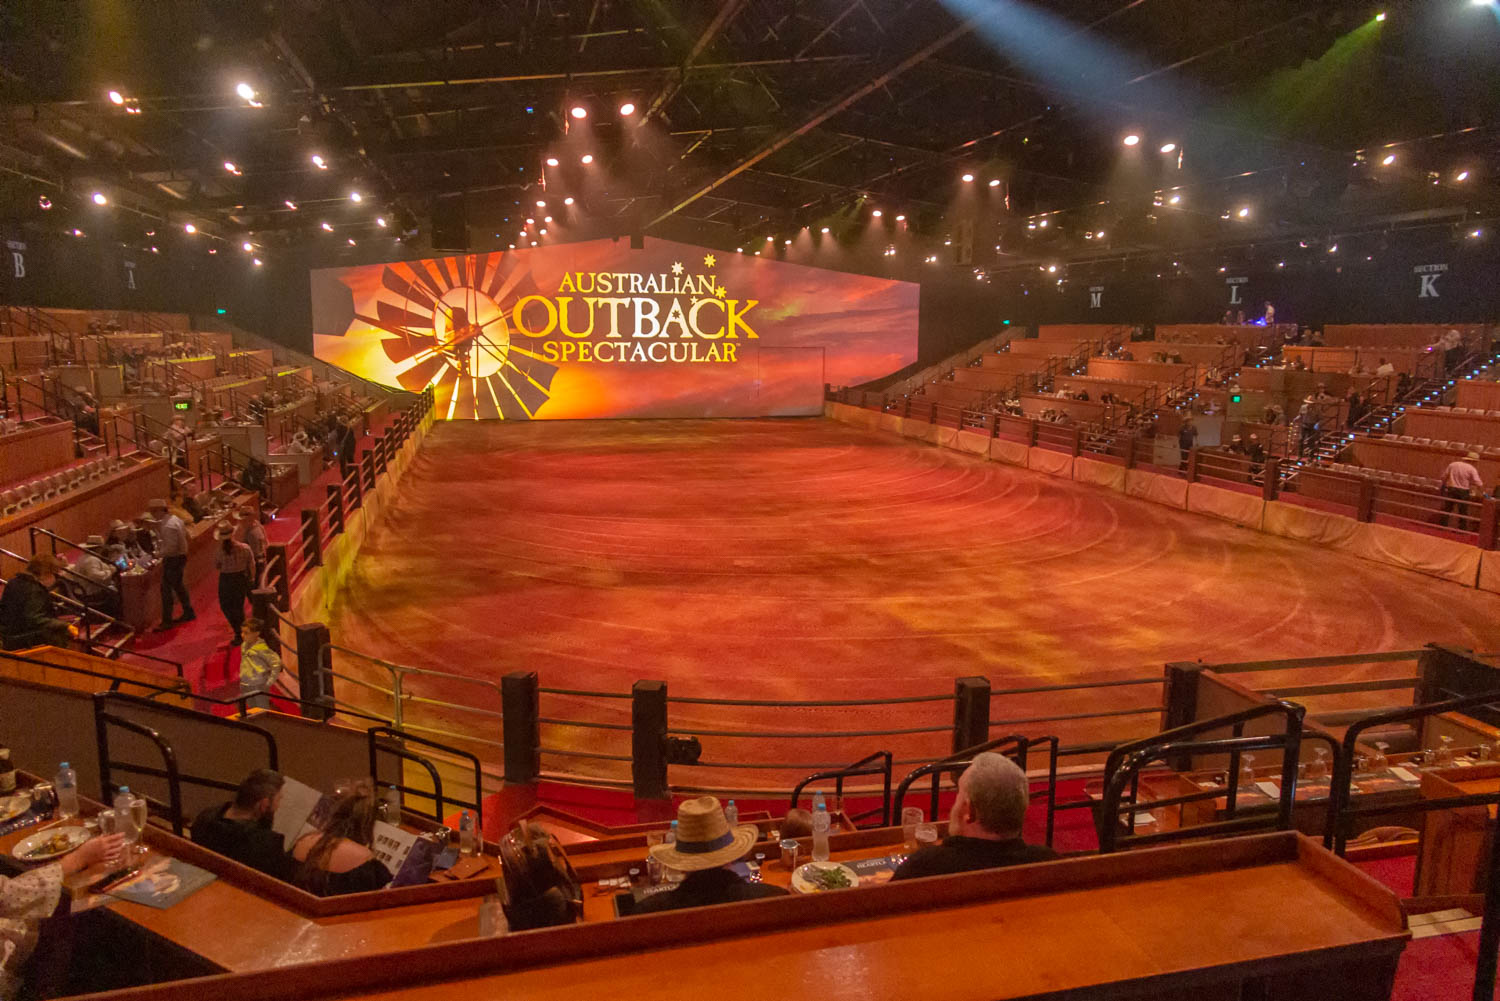 Richard Smith on Twitter: "Saddled last night to see friend Emma Irene (AKA Sarah) in reopening of Australian Outback Spectacular on the Gold Coast.⁣ Experience Australian Outback Spectacular's Heartland